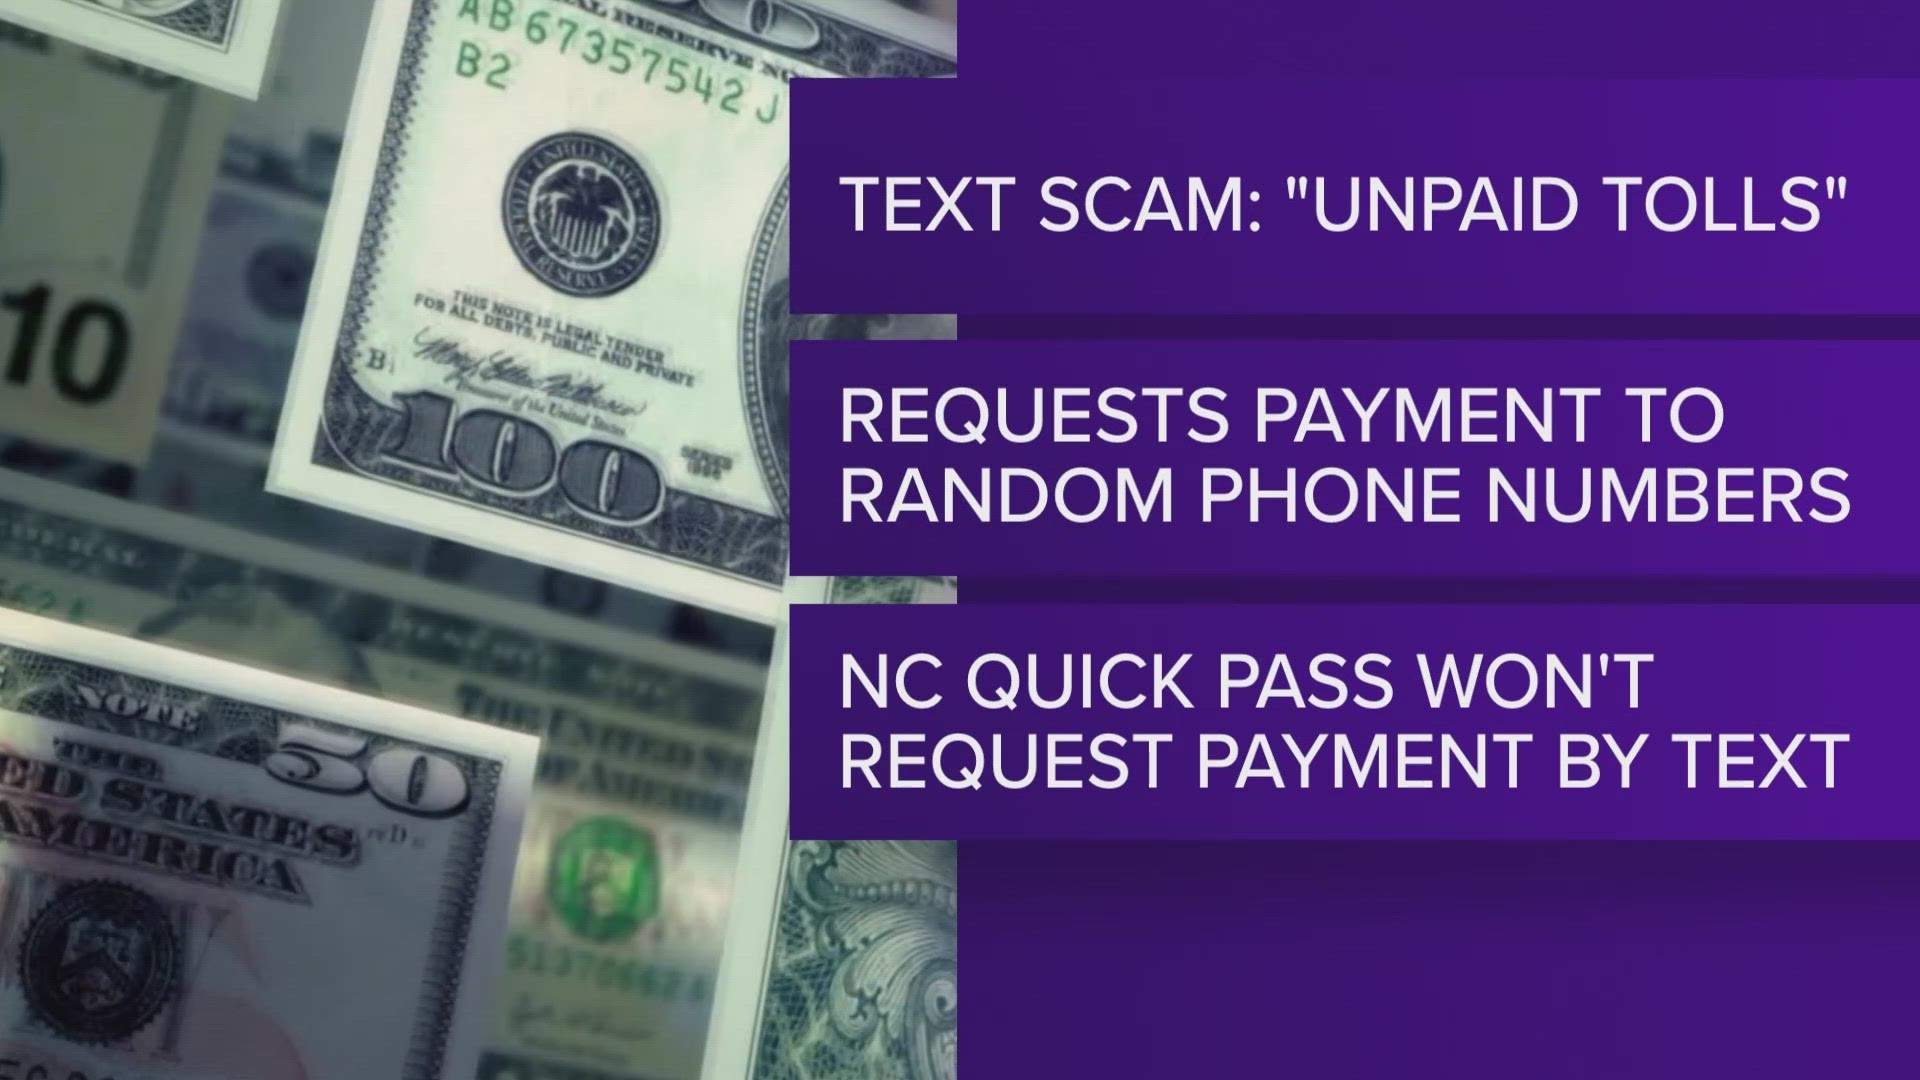 The NCDOT has warned about a recent scam in which individuals receive text messages from scammers demanding money for "unpaid" tolls.